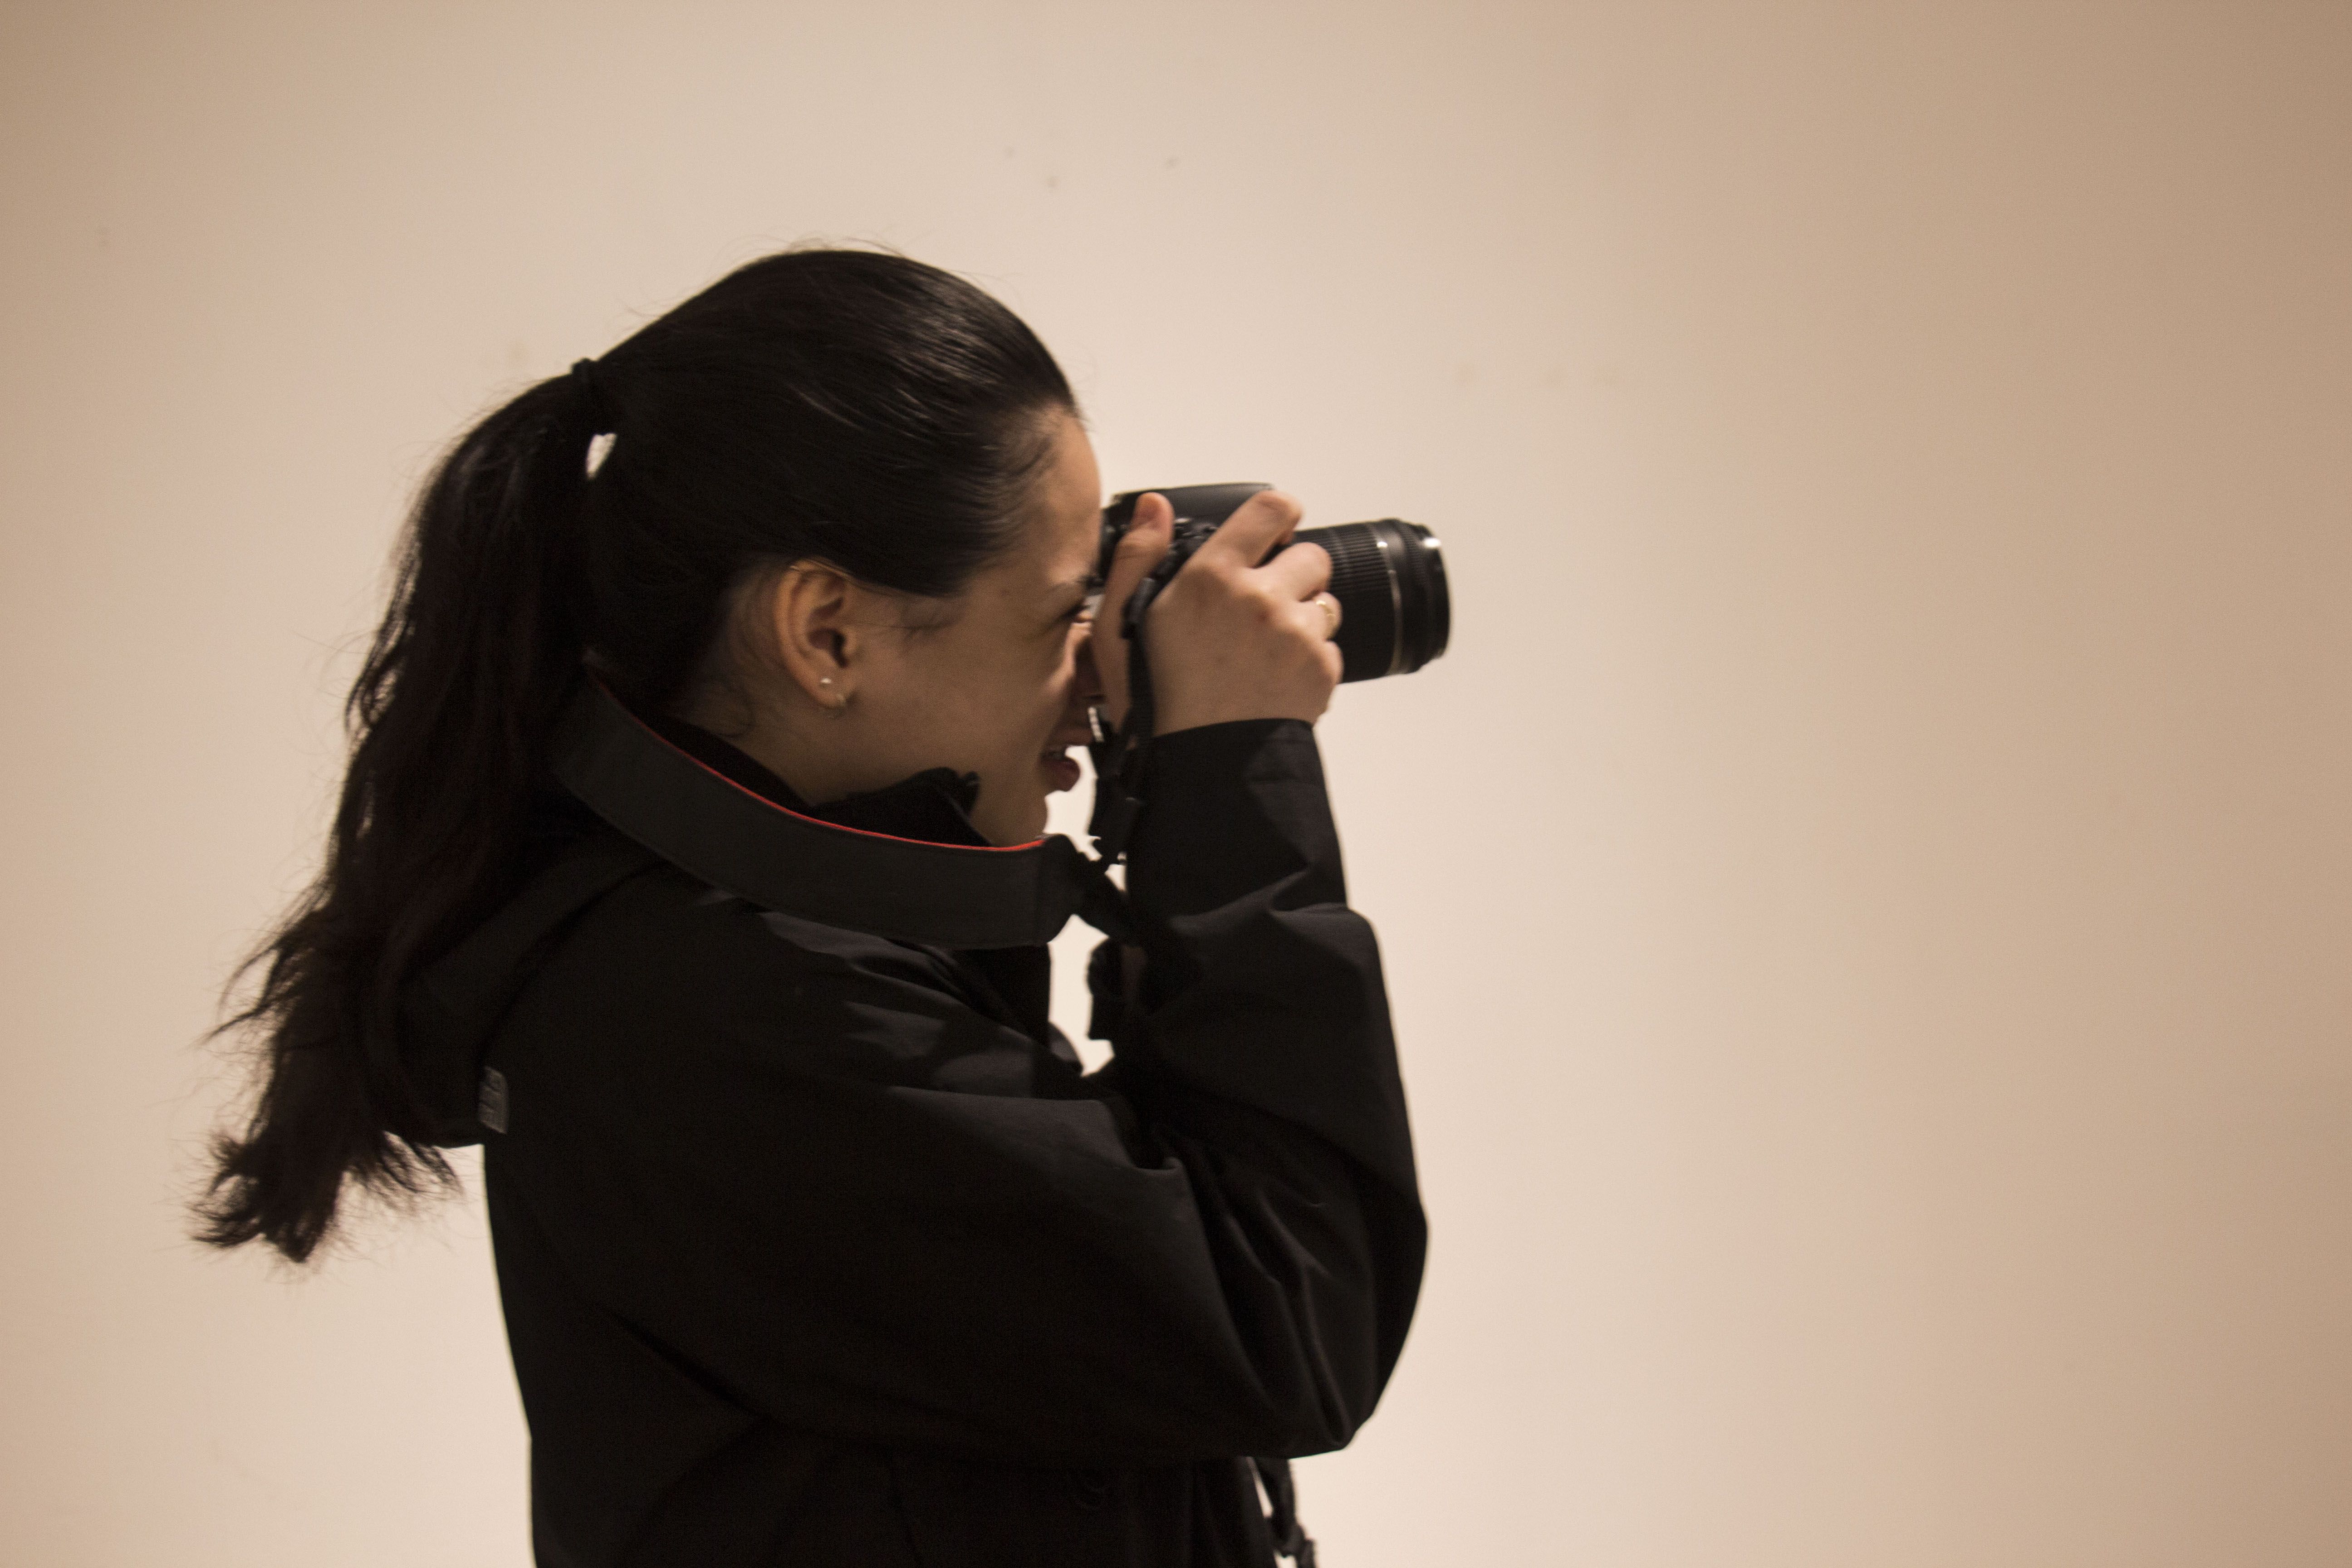 A student from Columbia Heights Educational Campus takes photographs for the workshop. Image by Ifath Sayed. United States, 2017. 